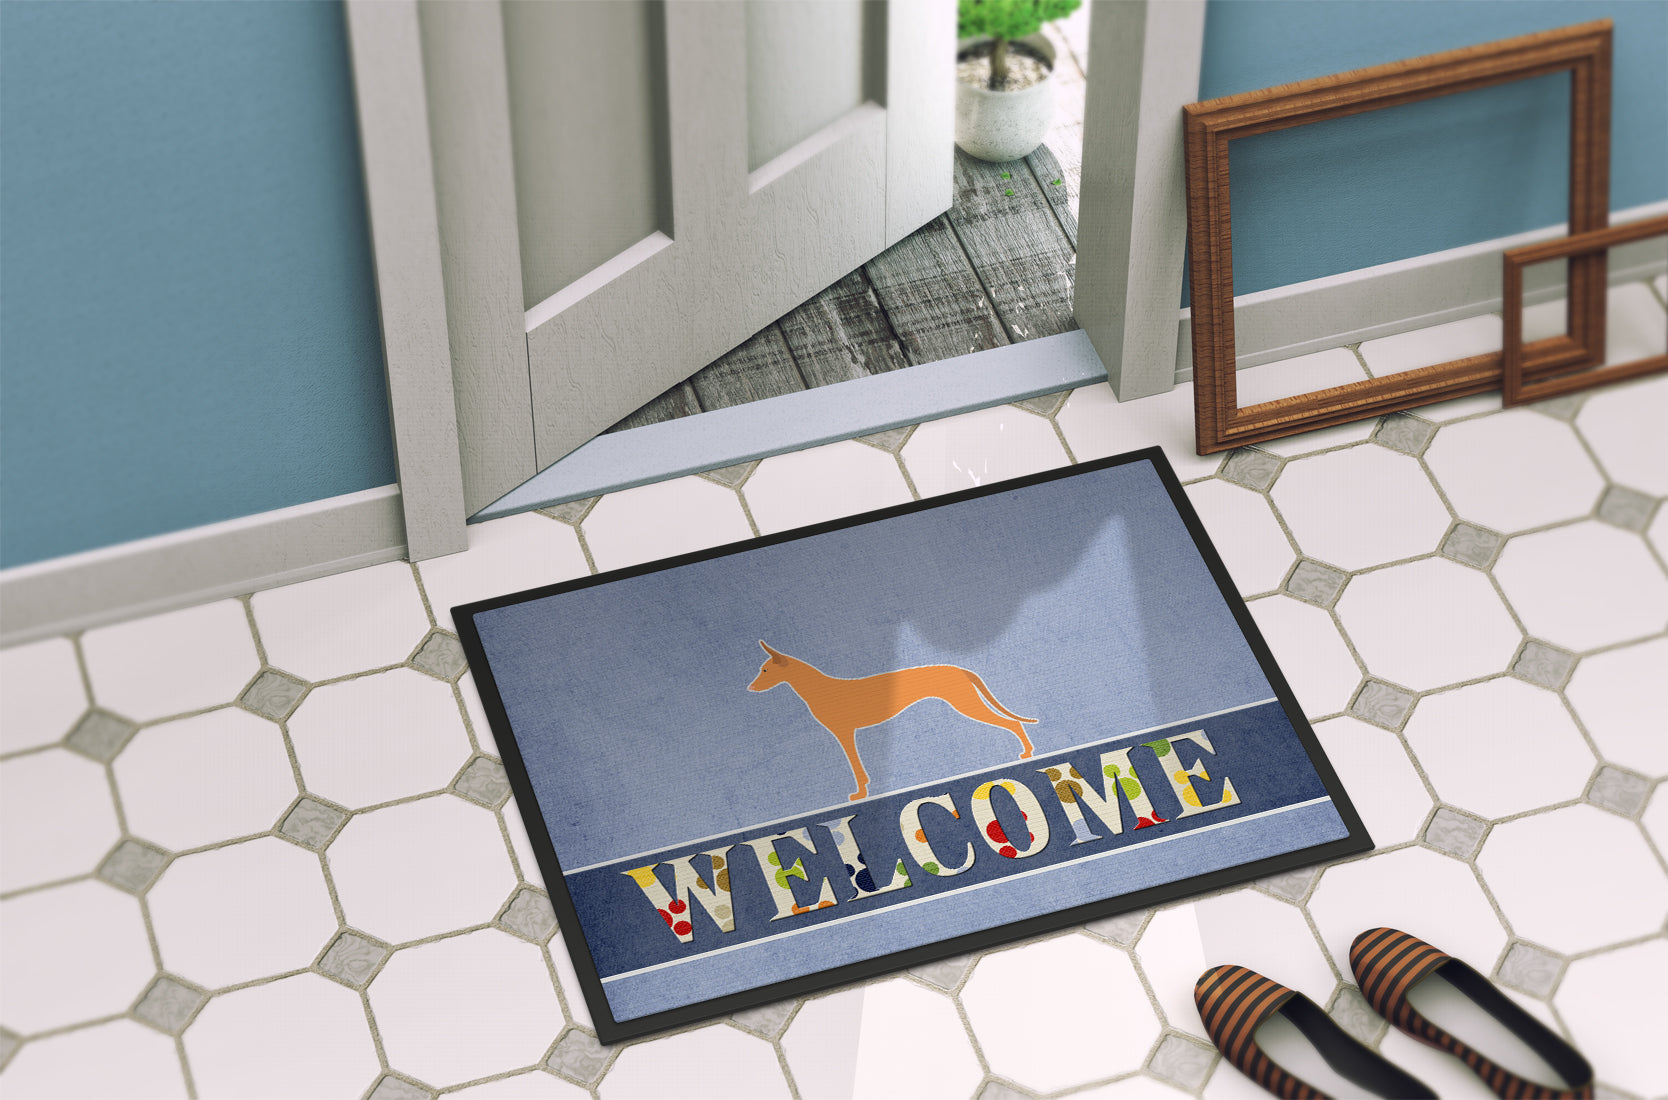 Pharaoh Hound Welcome Indoor or Outdoor Mat 18x27 BB5492MAT - the-store.com